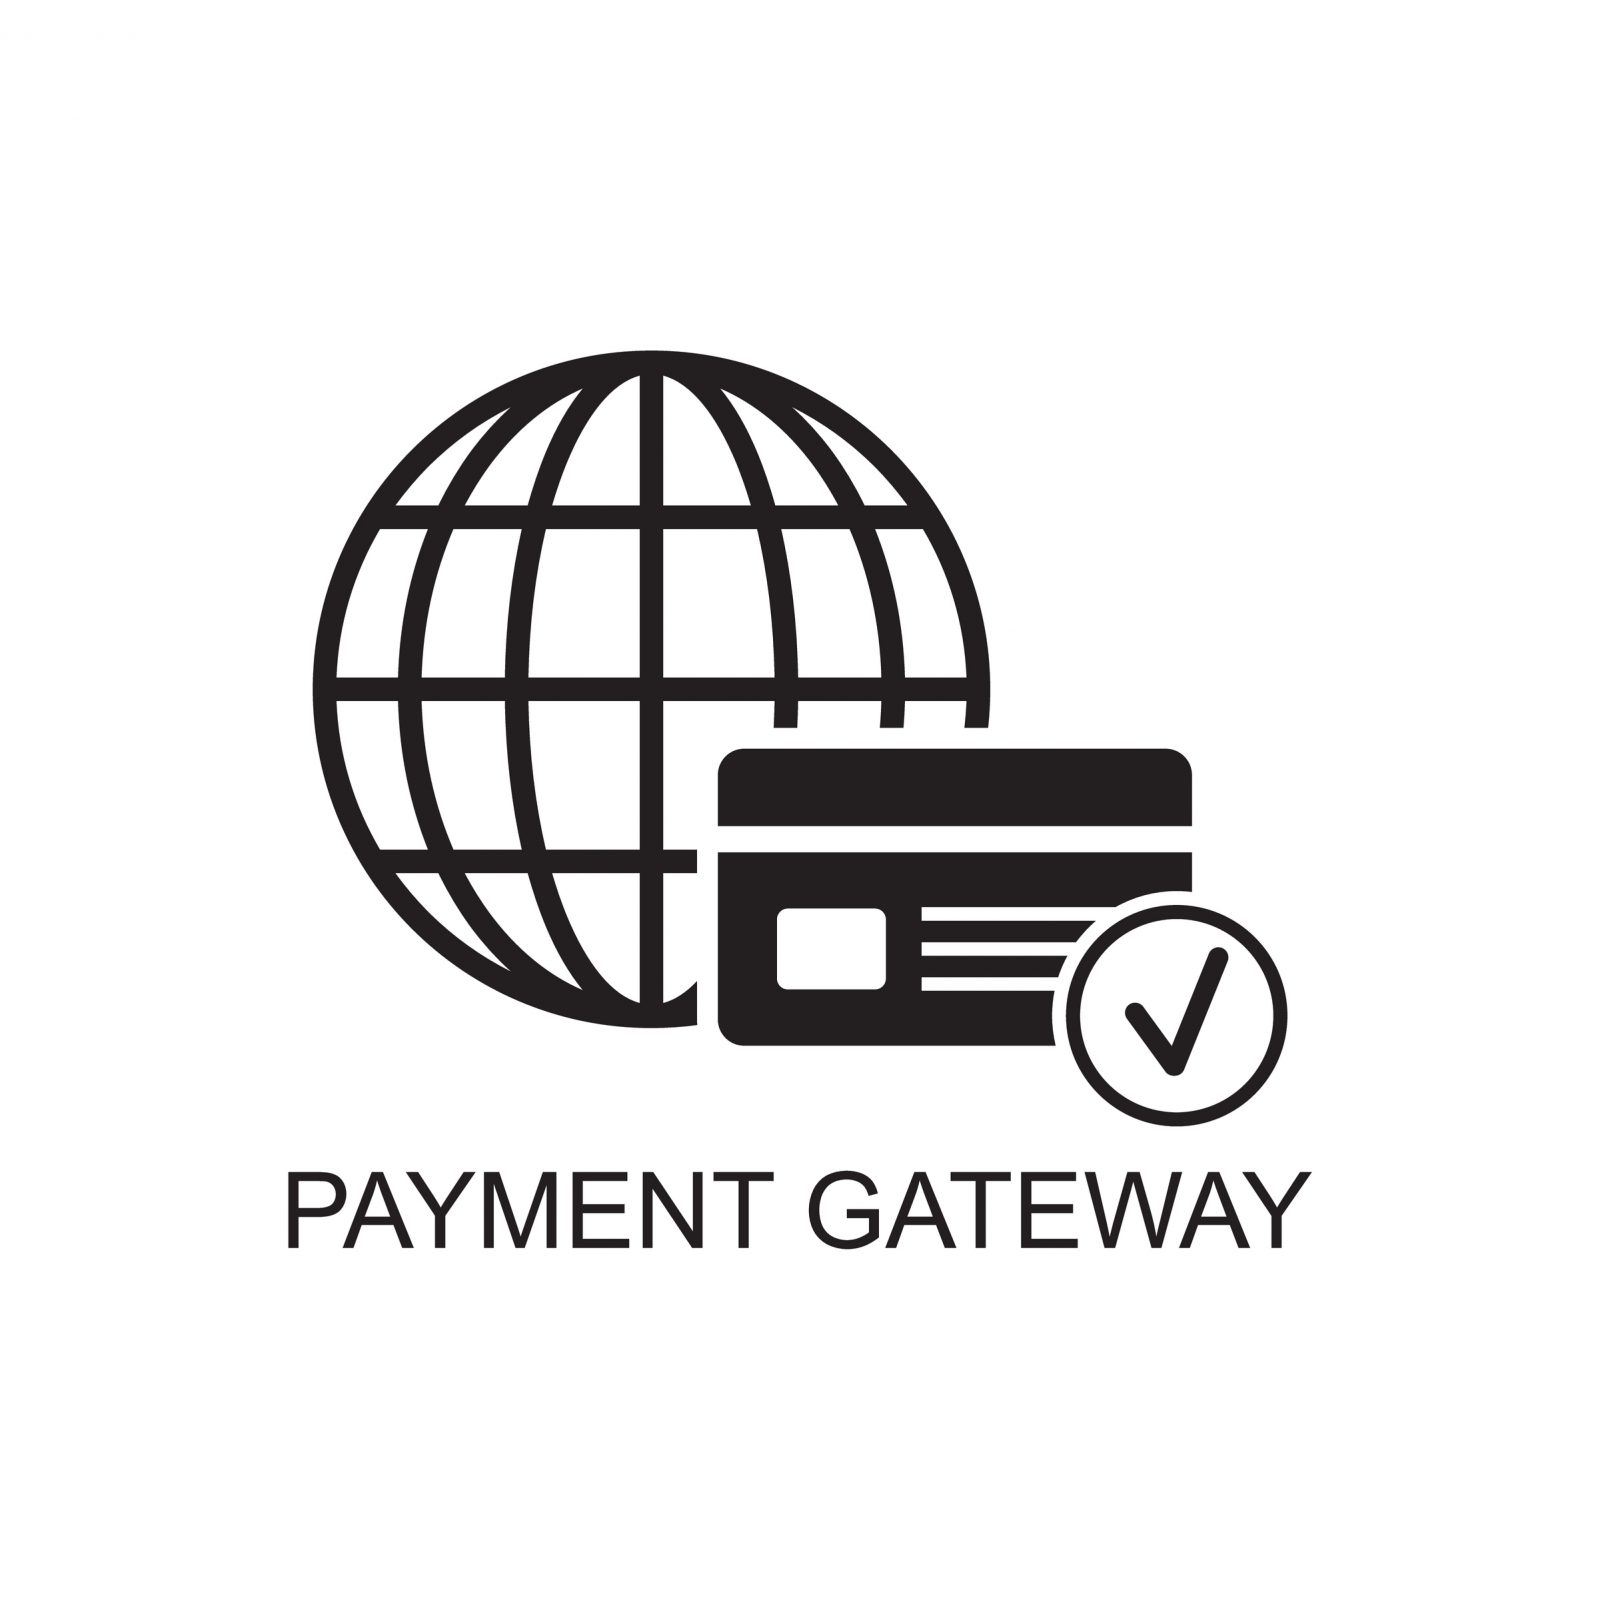 A globe symbol with a card symbol that has a checkmark with the word payment gateway below it.